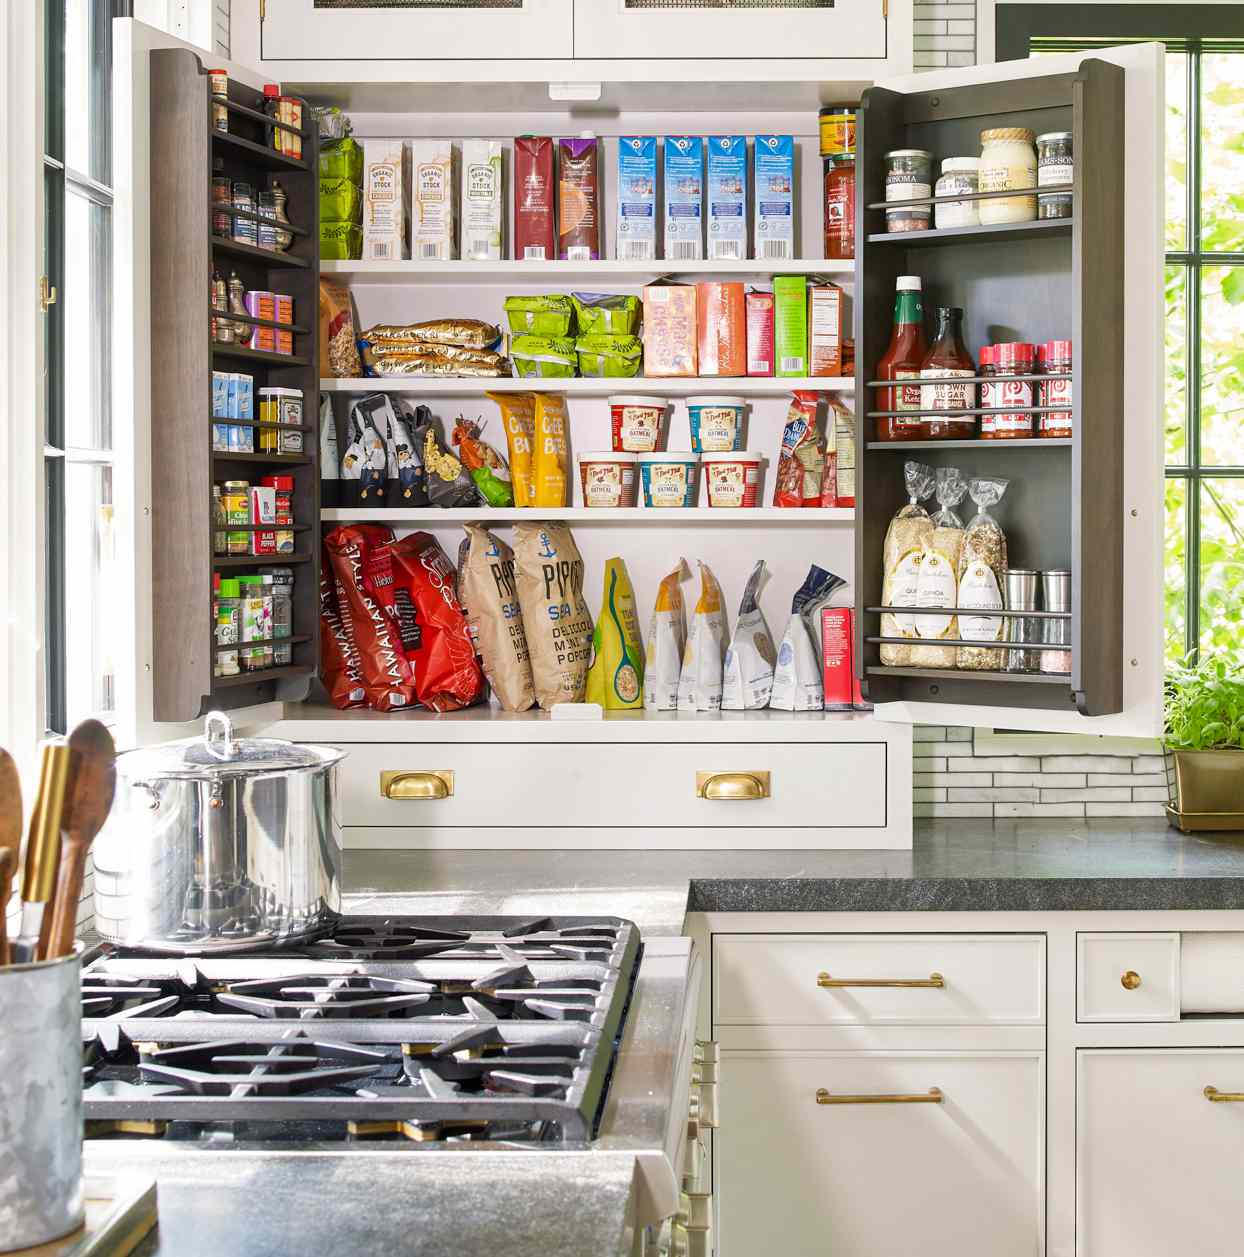 20 Brilliant Ideas for Organizing Kitchen Cabinets   Better Homes ...